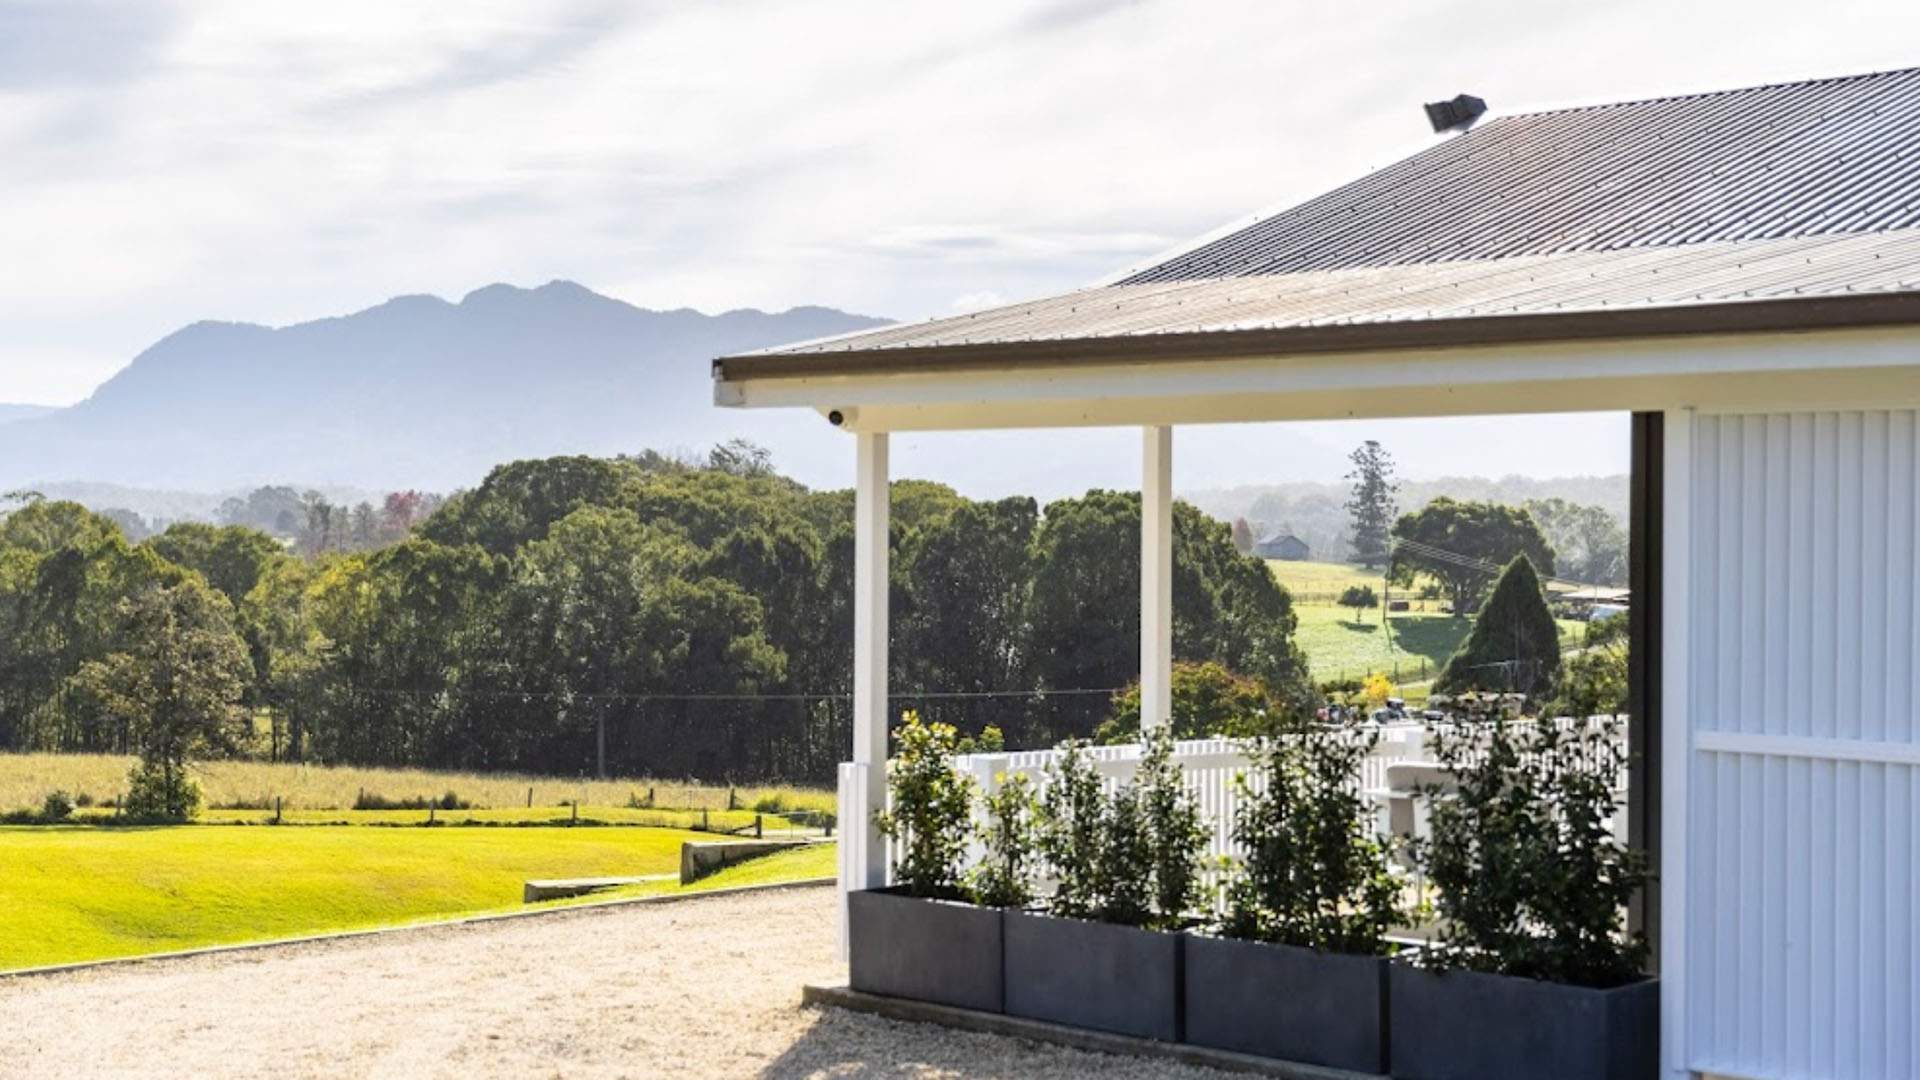 Three Blue Ducks Is Opening Its Latest Farm-to-Table Outpost at The Lodge in Bellingen